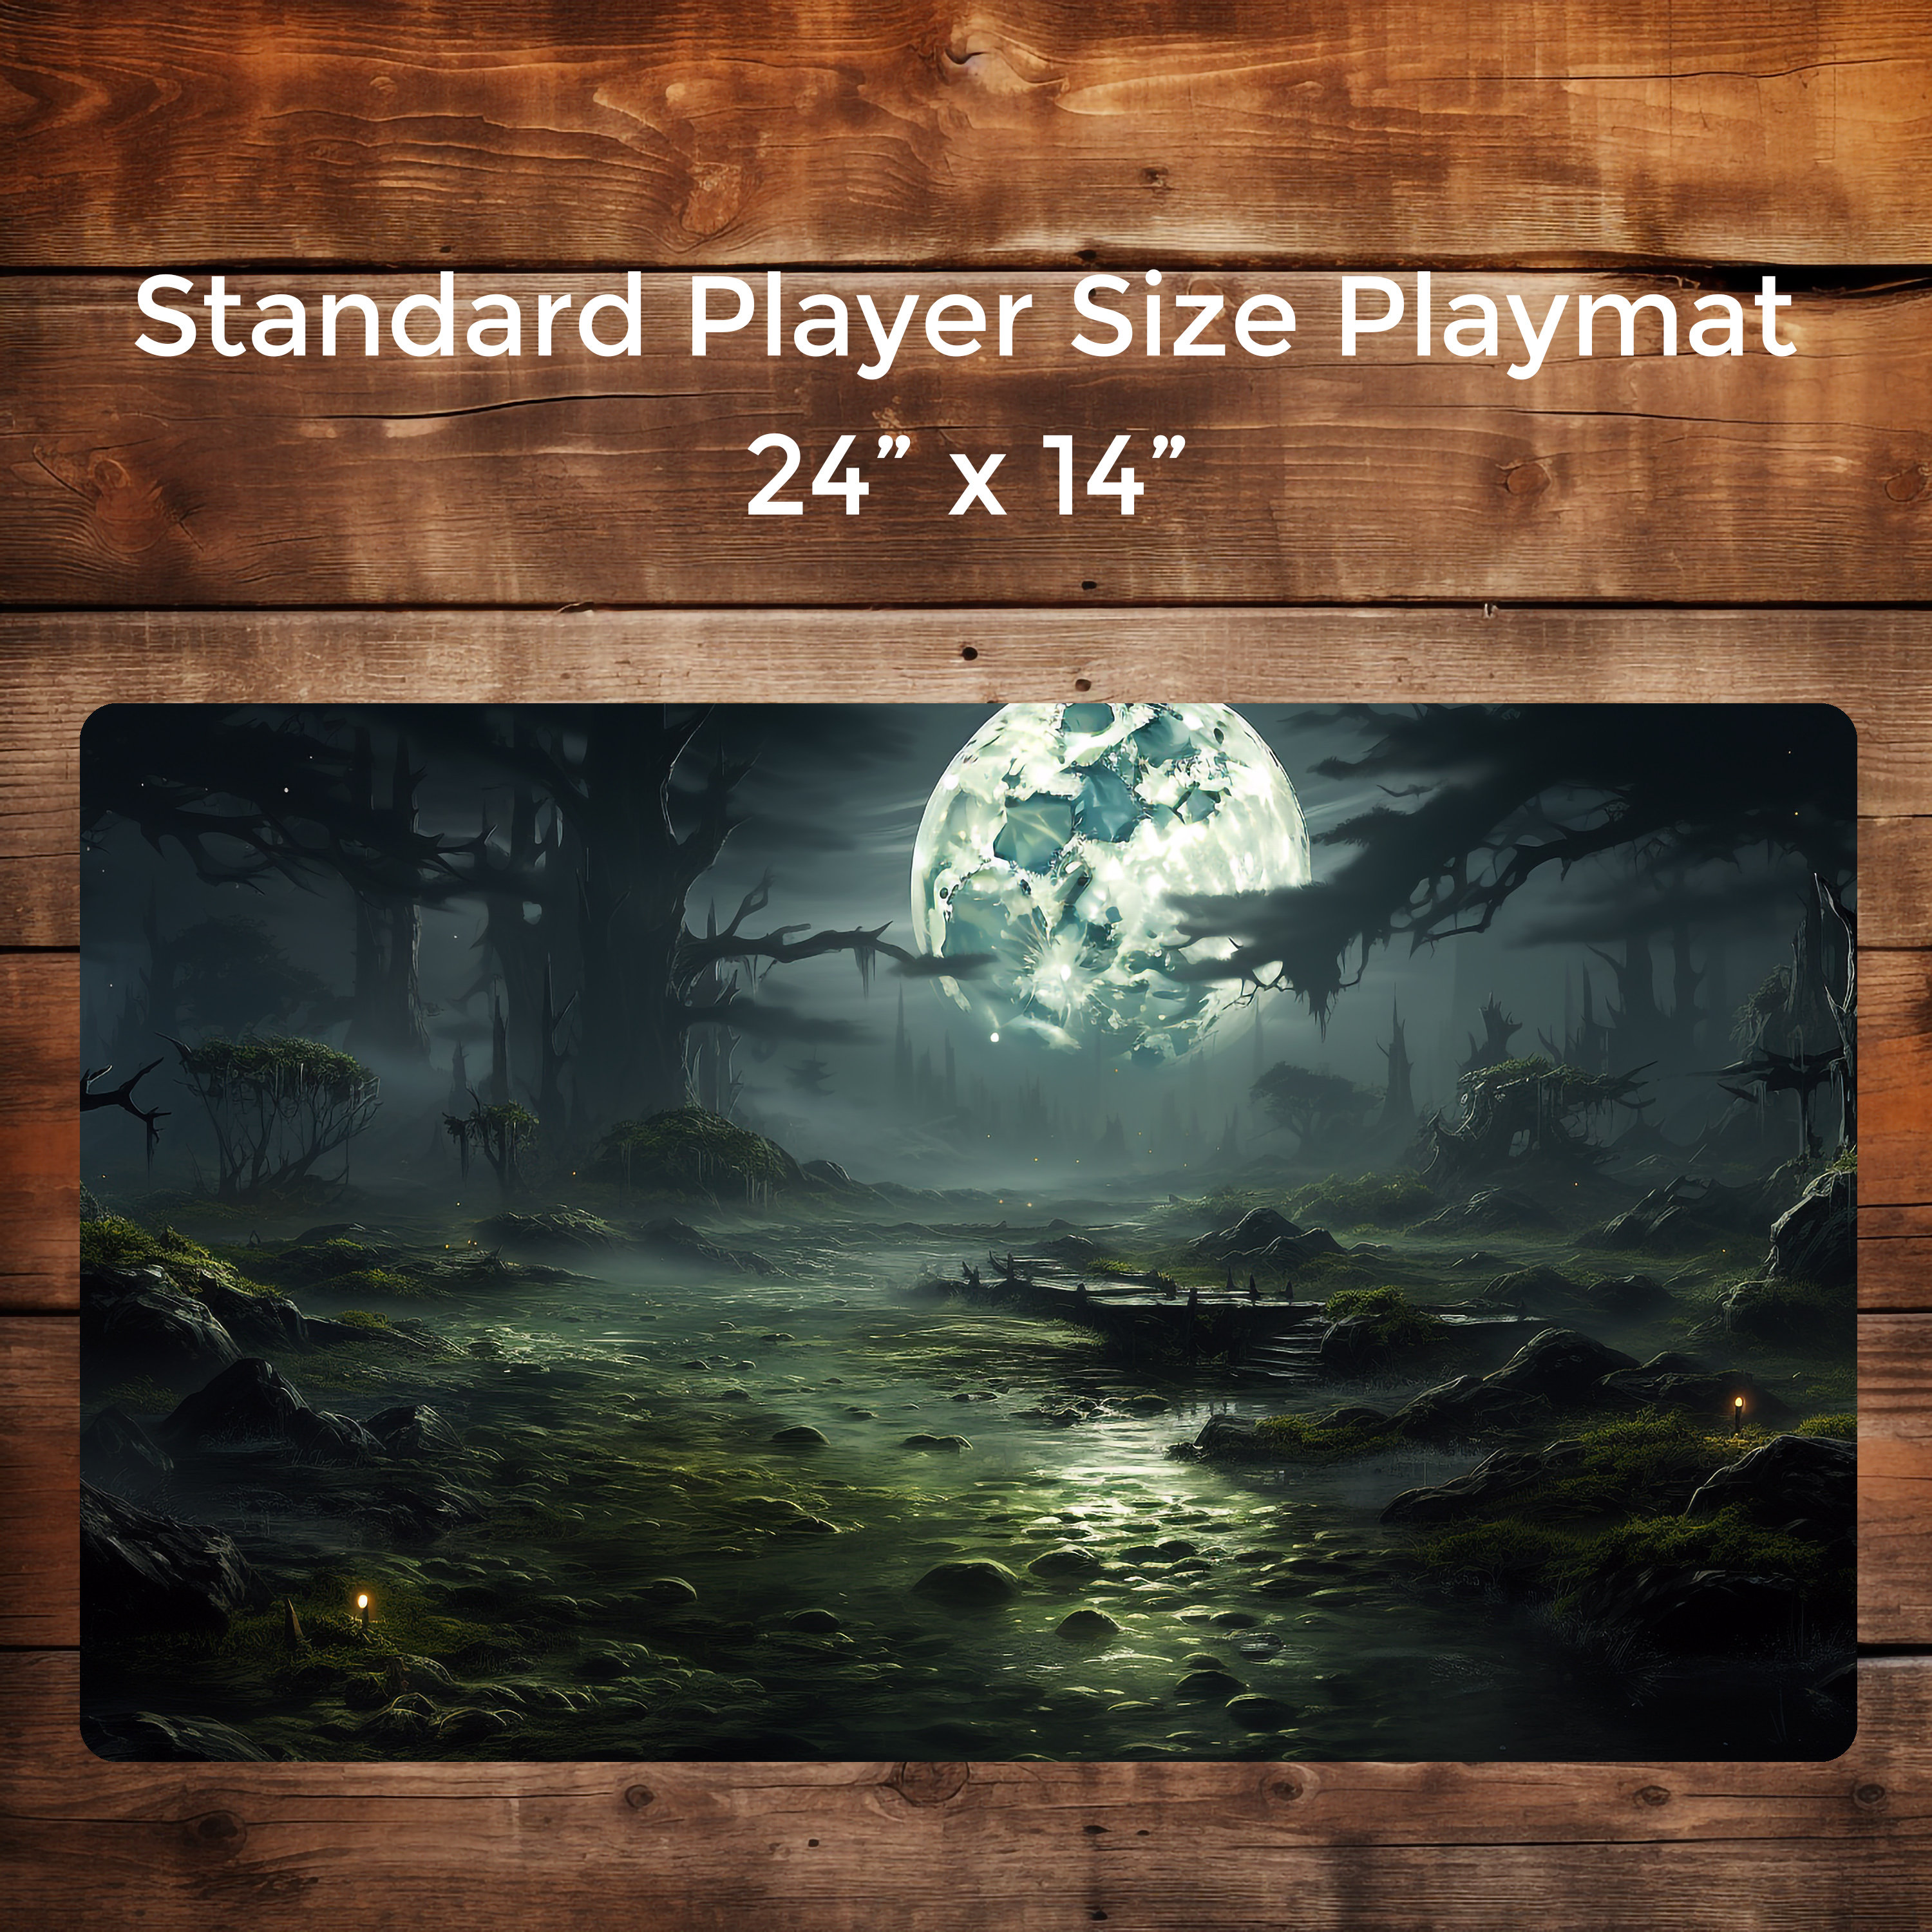 5th Edition Player Mat - Extra Large – TotalPartyChill